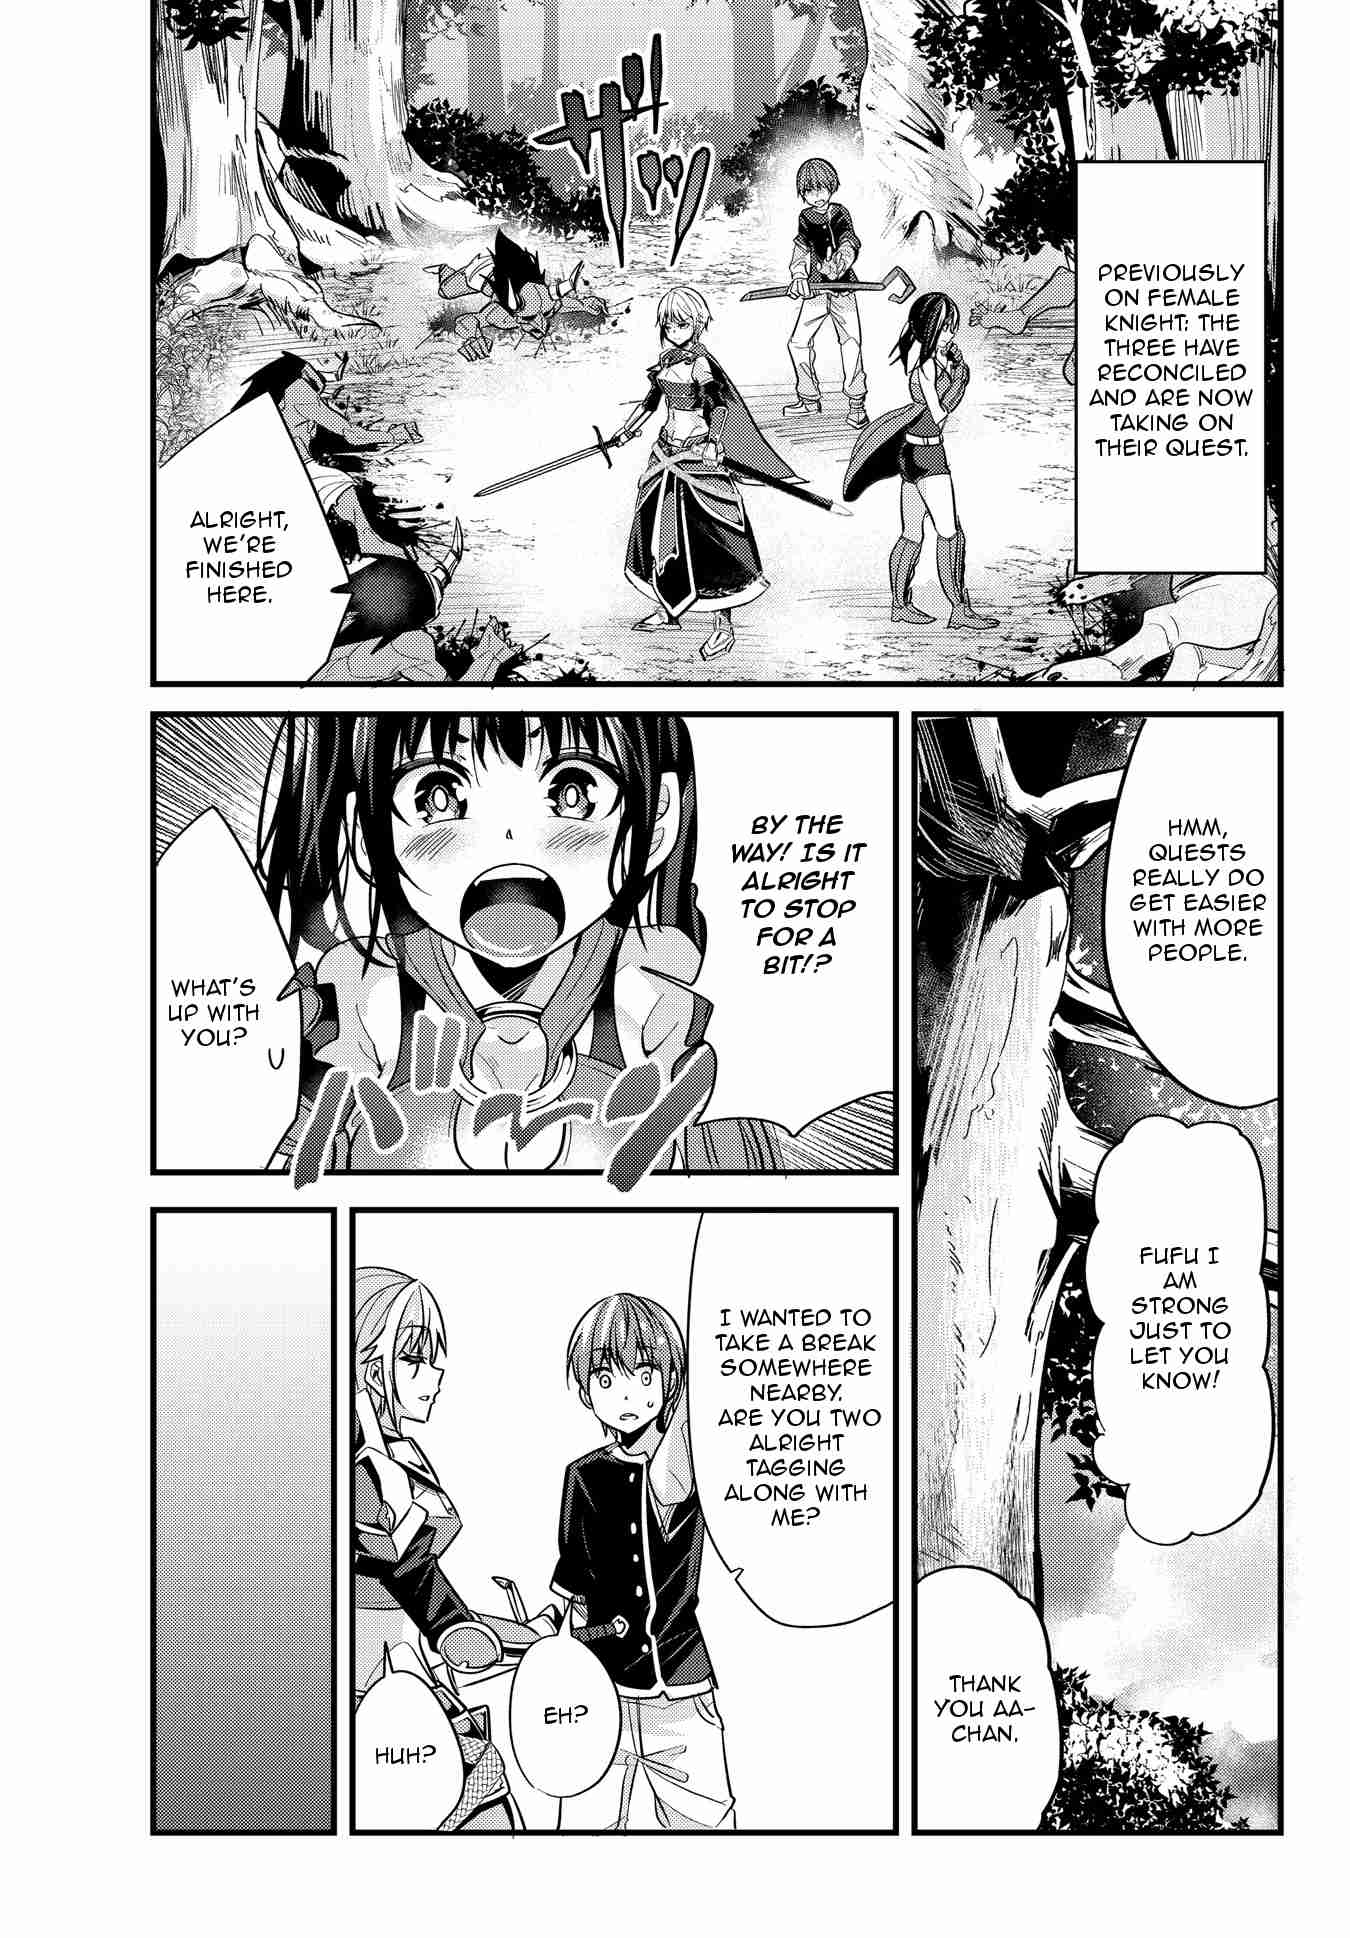 A Story About Treating a Female Knight, Who Has Never Been Treated as a Woman Ch.24